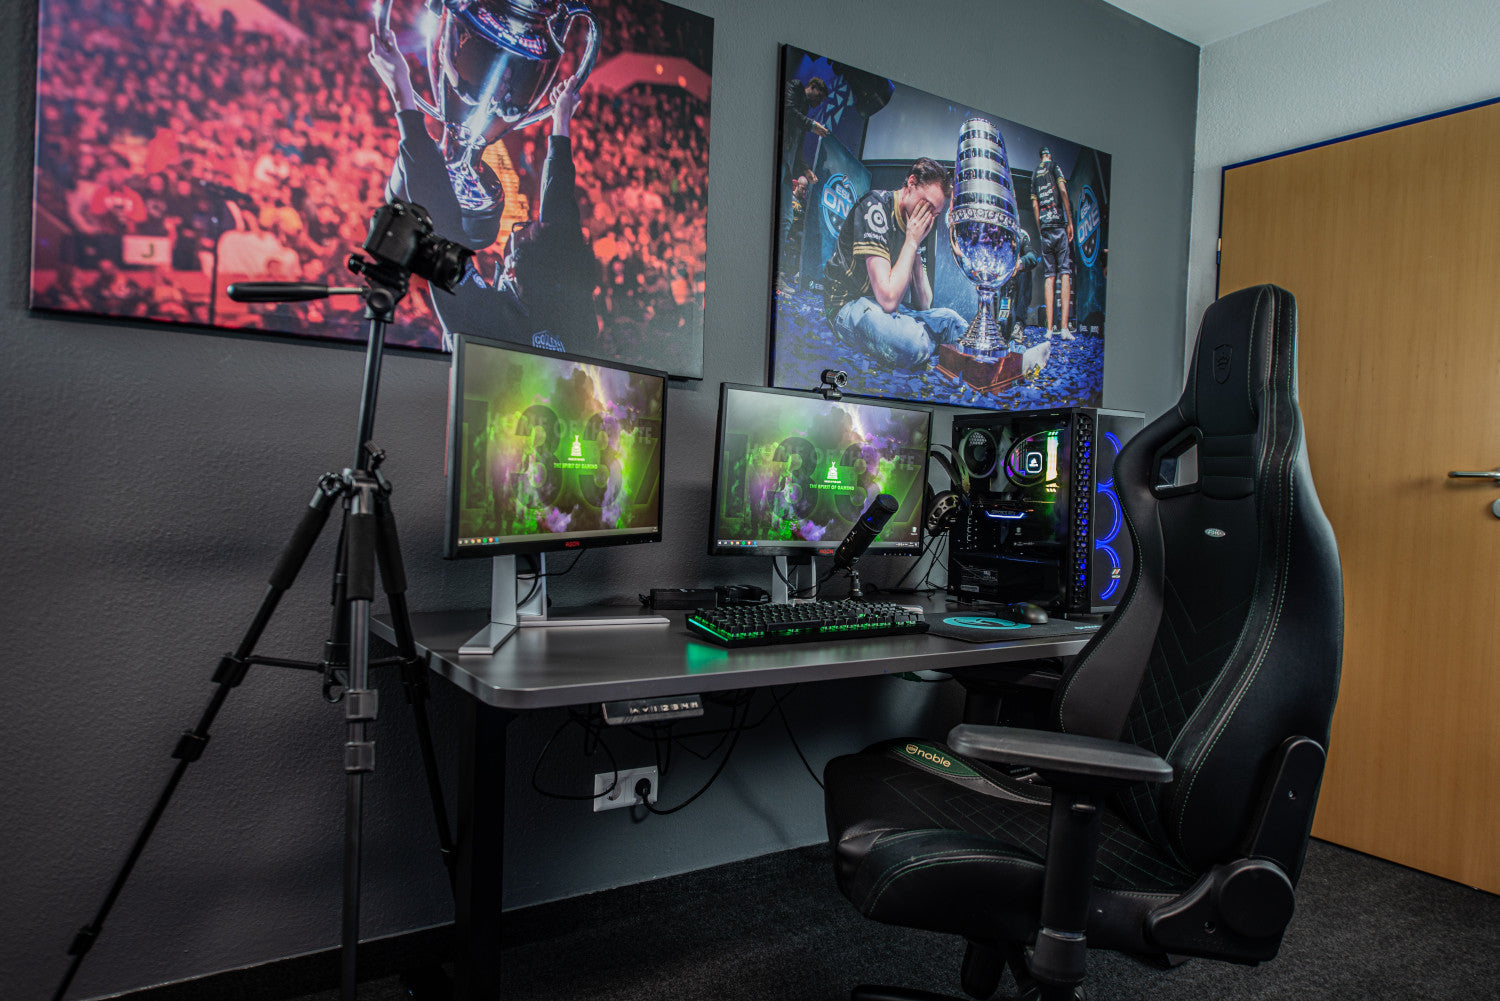 Are Gaming Chairs Good For Office Work?